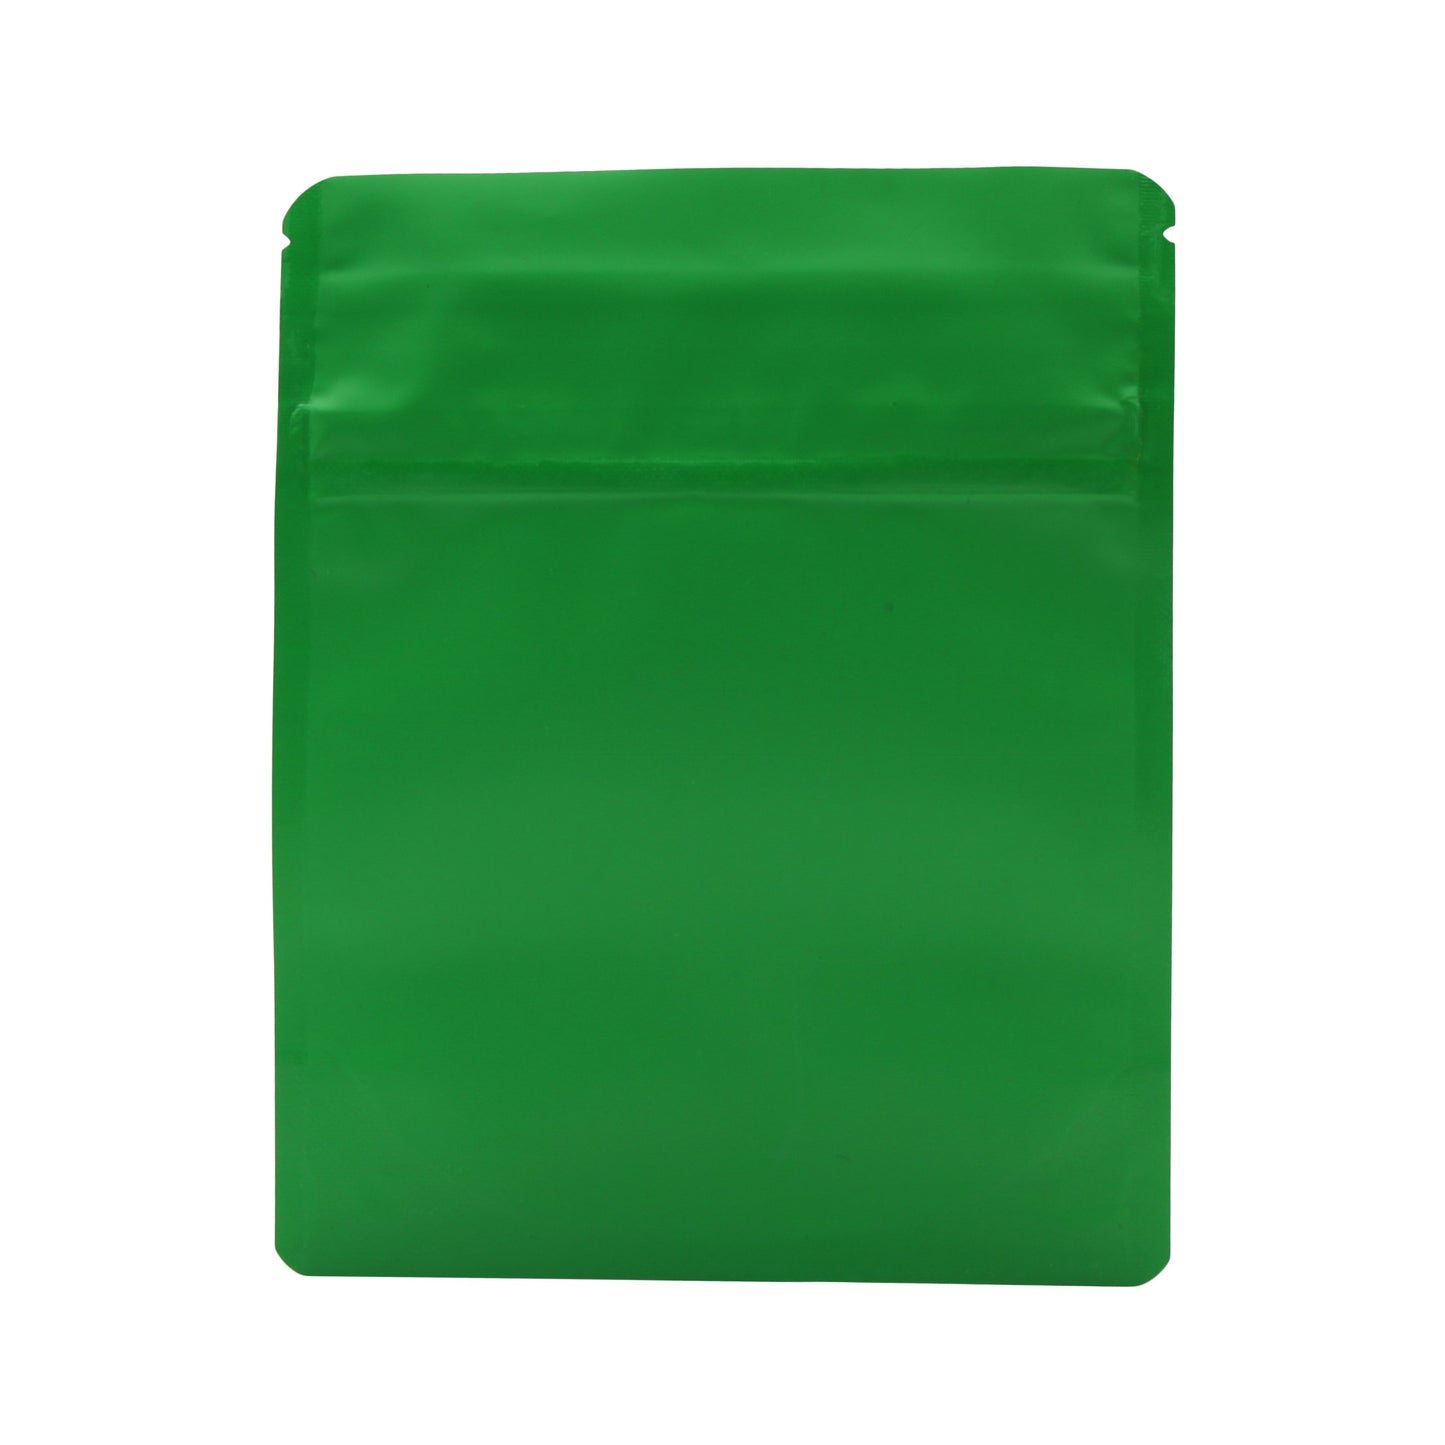 Bag King Child-Resistant Opaque Wide Mouth Bag (1/4th oz) 4.7" x 5.9" Matte Green